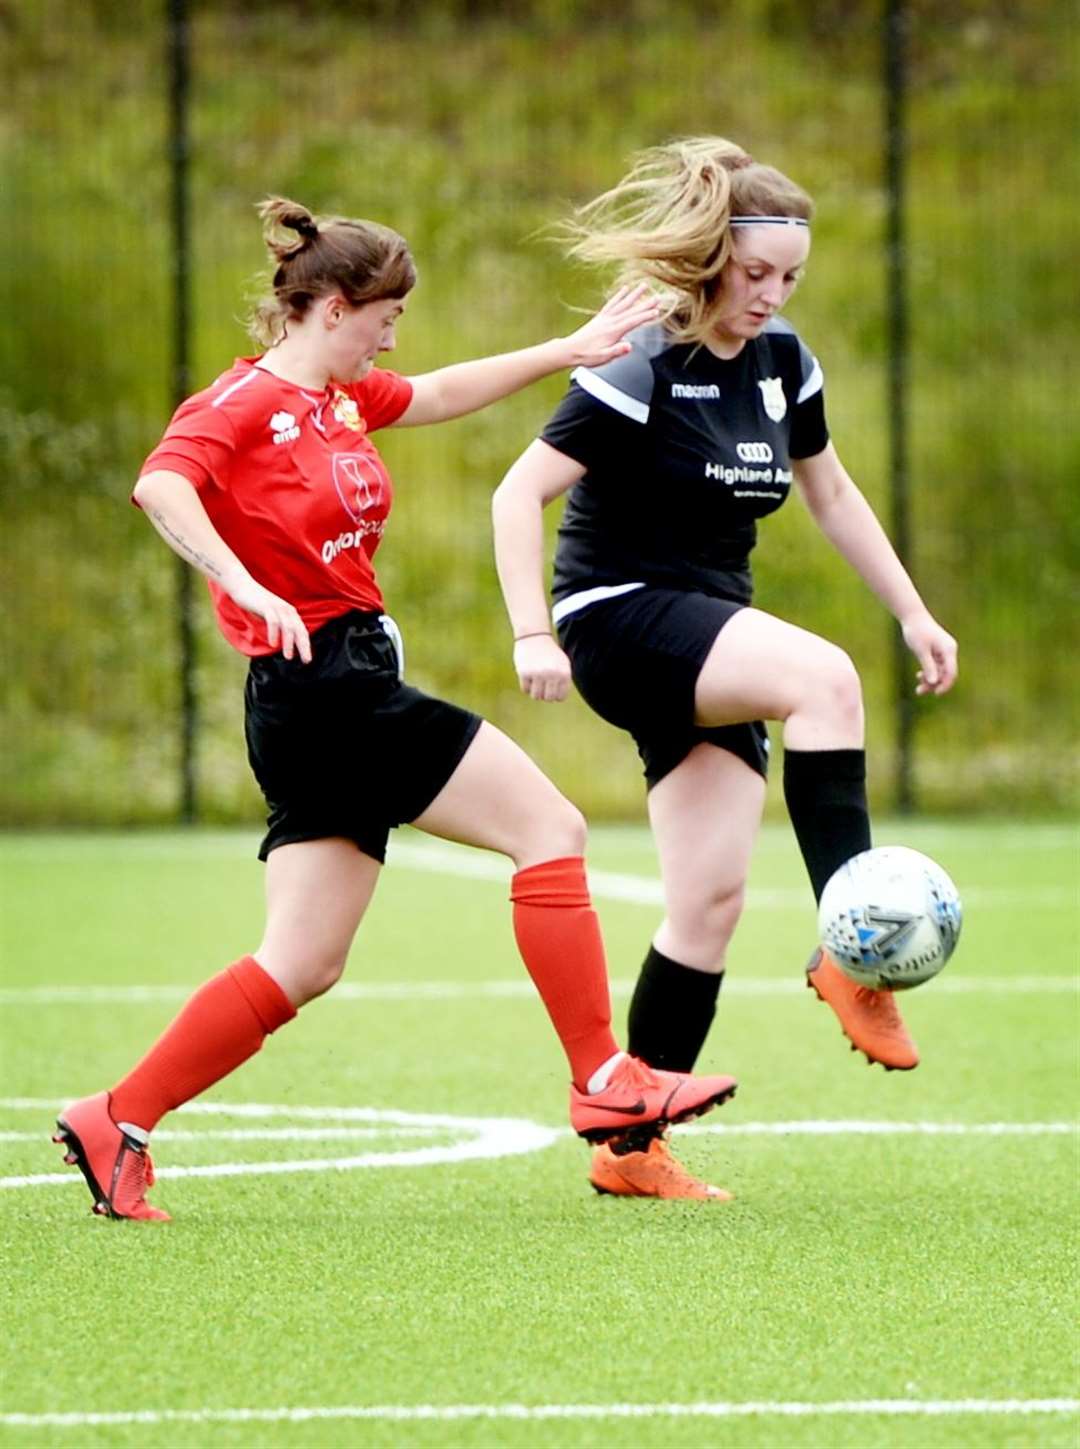 Inverness Caledonian Thistle Womens Development player Simone Coles and Clachnacuddin Ladies Shannon Fulton (left)...Clach vs Caley Ladies.Picture: Gair Fraser. Image No. 044305..